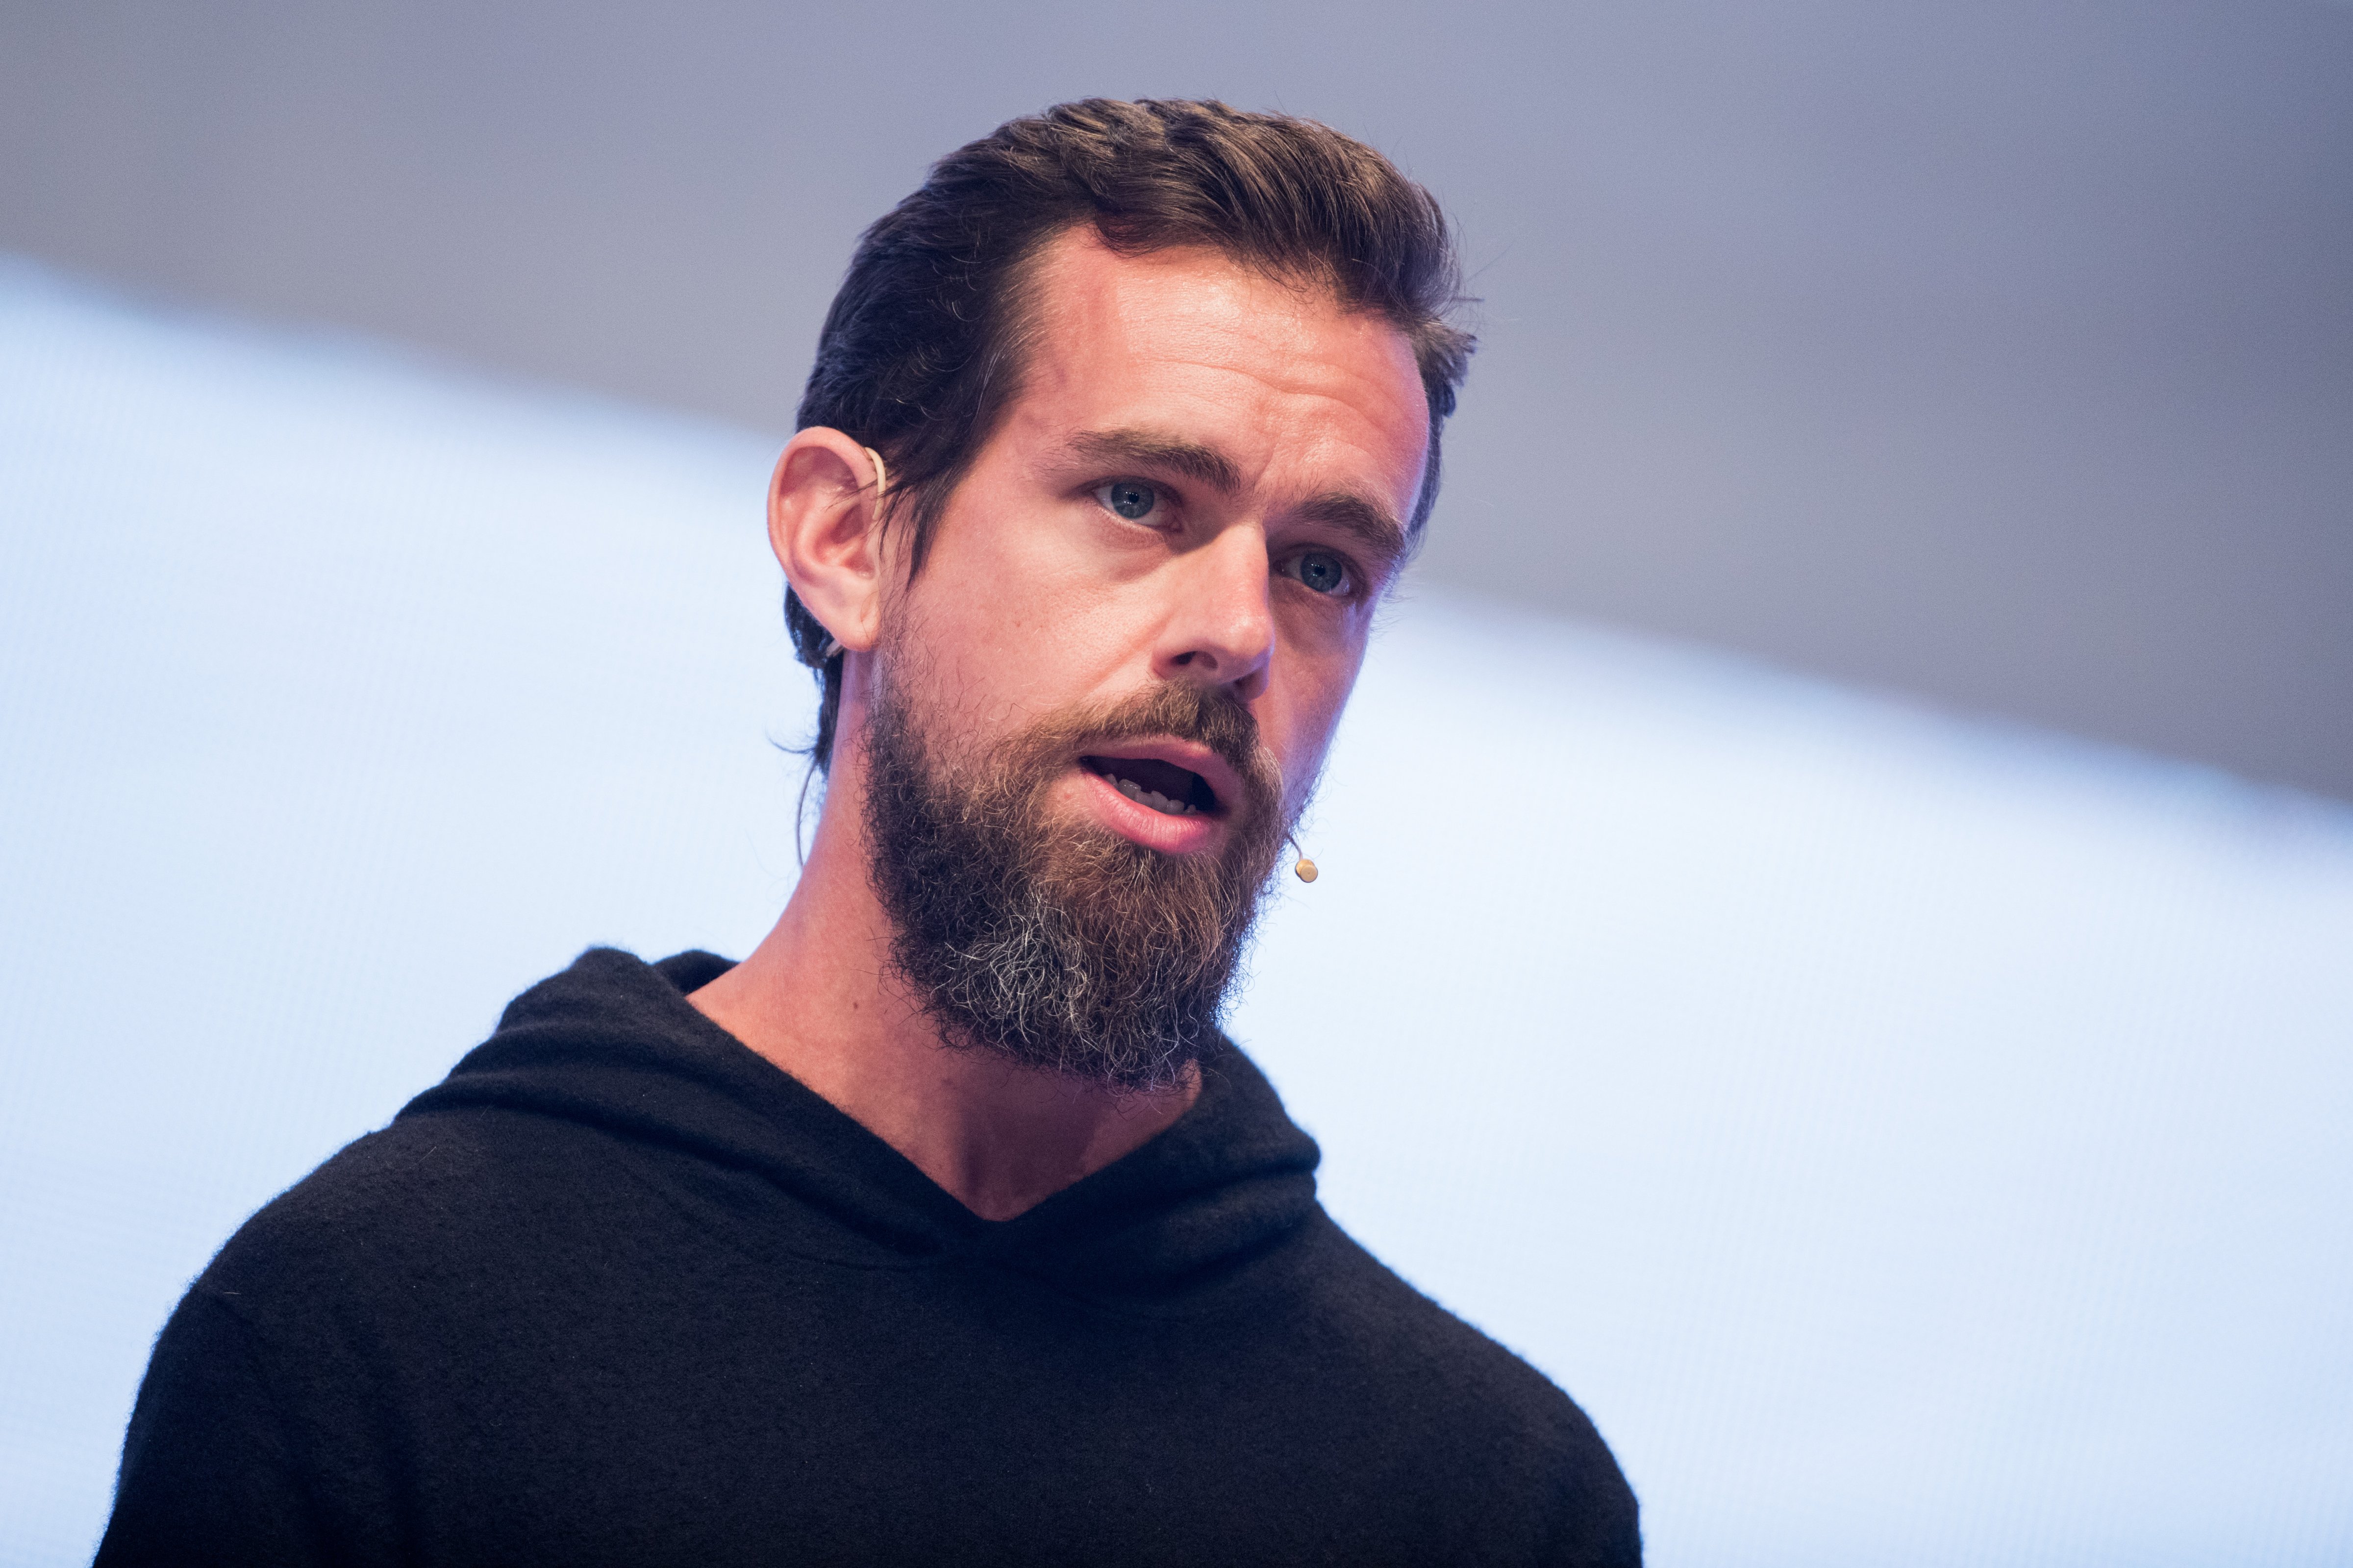 Jack Dorsey, CEO of Twitter is pictured at the digital fair dmexco in Cologne, Germany, on Sept. 13, 2017. (Rolf Vennenbernd—dpa/Getty Images)